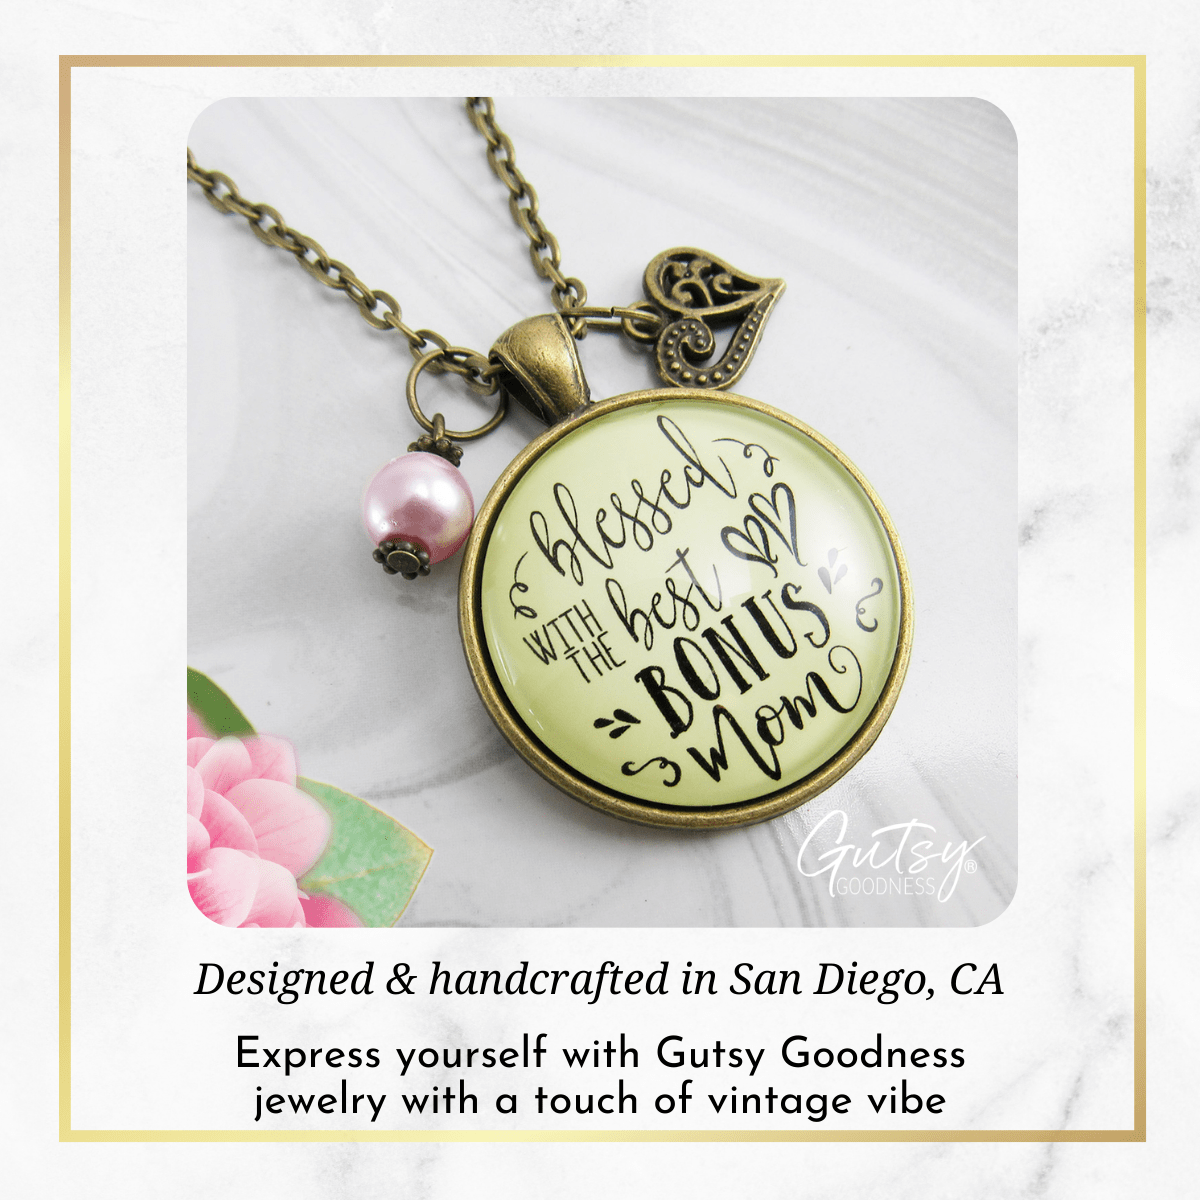 Gutsy Goodness Blessed with Best Bonus Mom Necklace Thank You Mother Womens Jewelry Gift - Gutsy Goodness;Blessed With Best Bonus Mom Necklace Thank You Mother Womens Jewelry Gift - Gutsy Goodness Handmade Jewelry Gifts